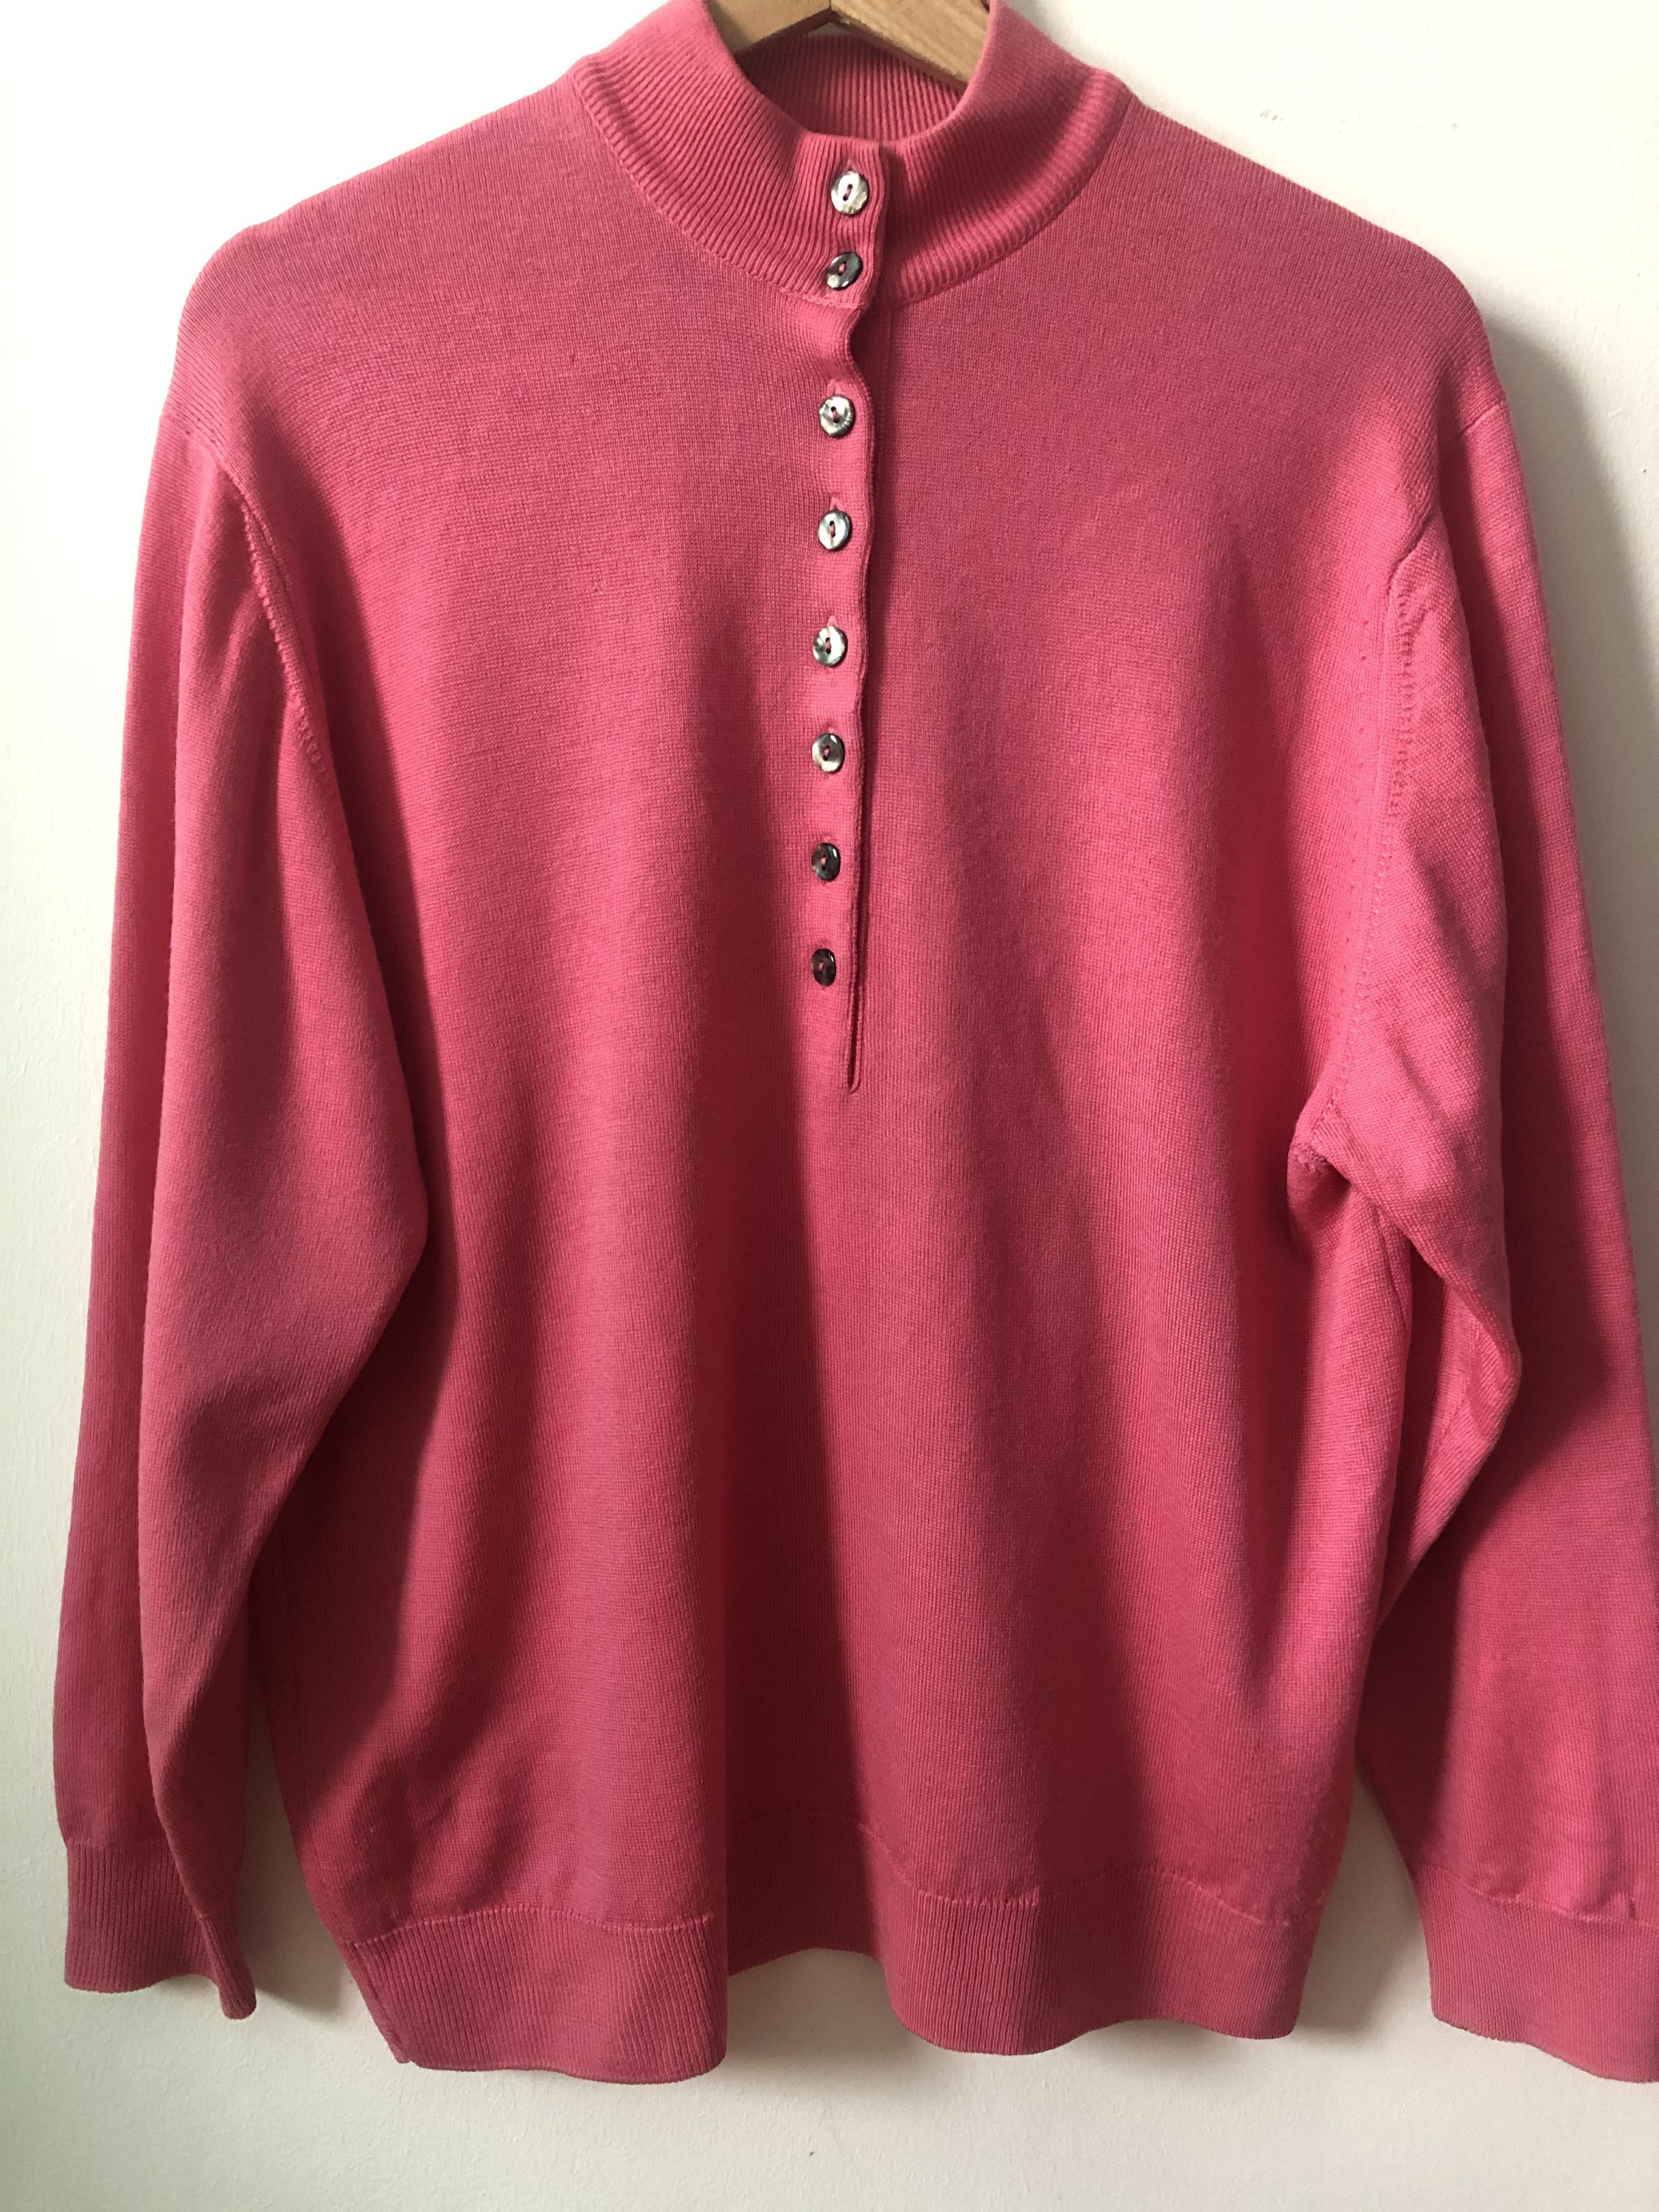 Vintage pink 100% wool sweater with buttons vintage sweater | Etsy